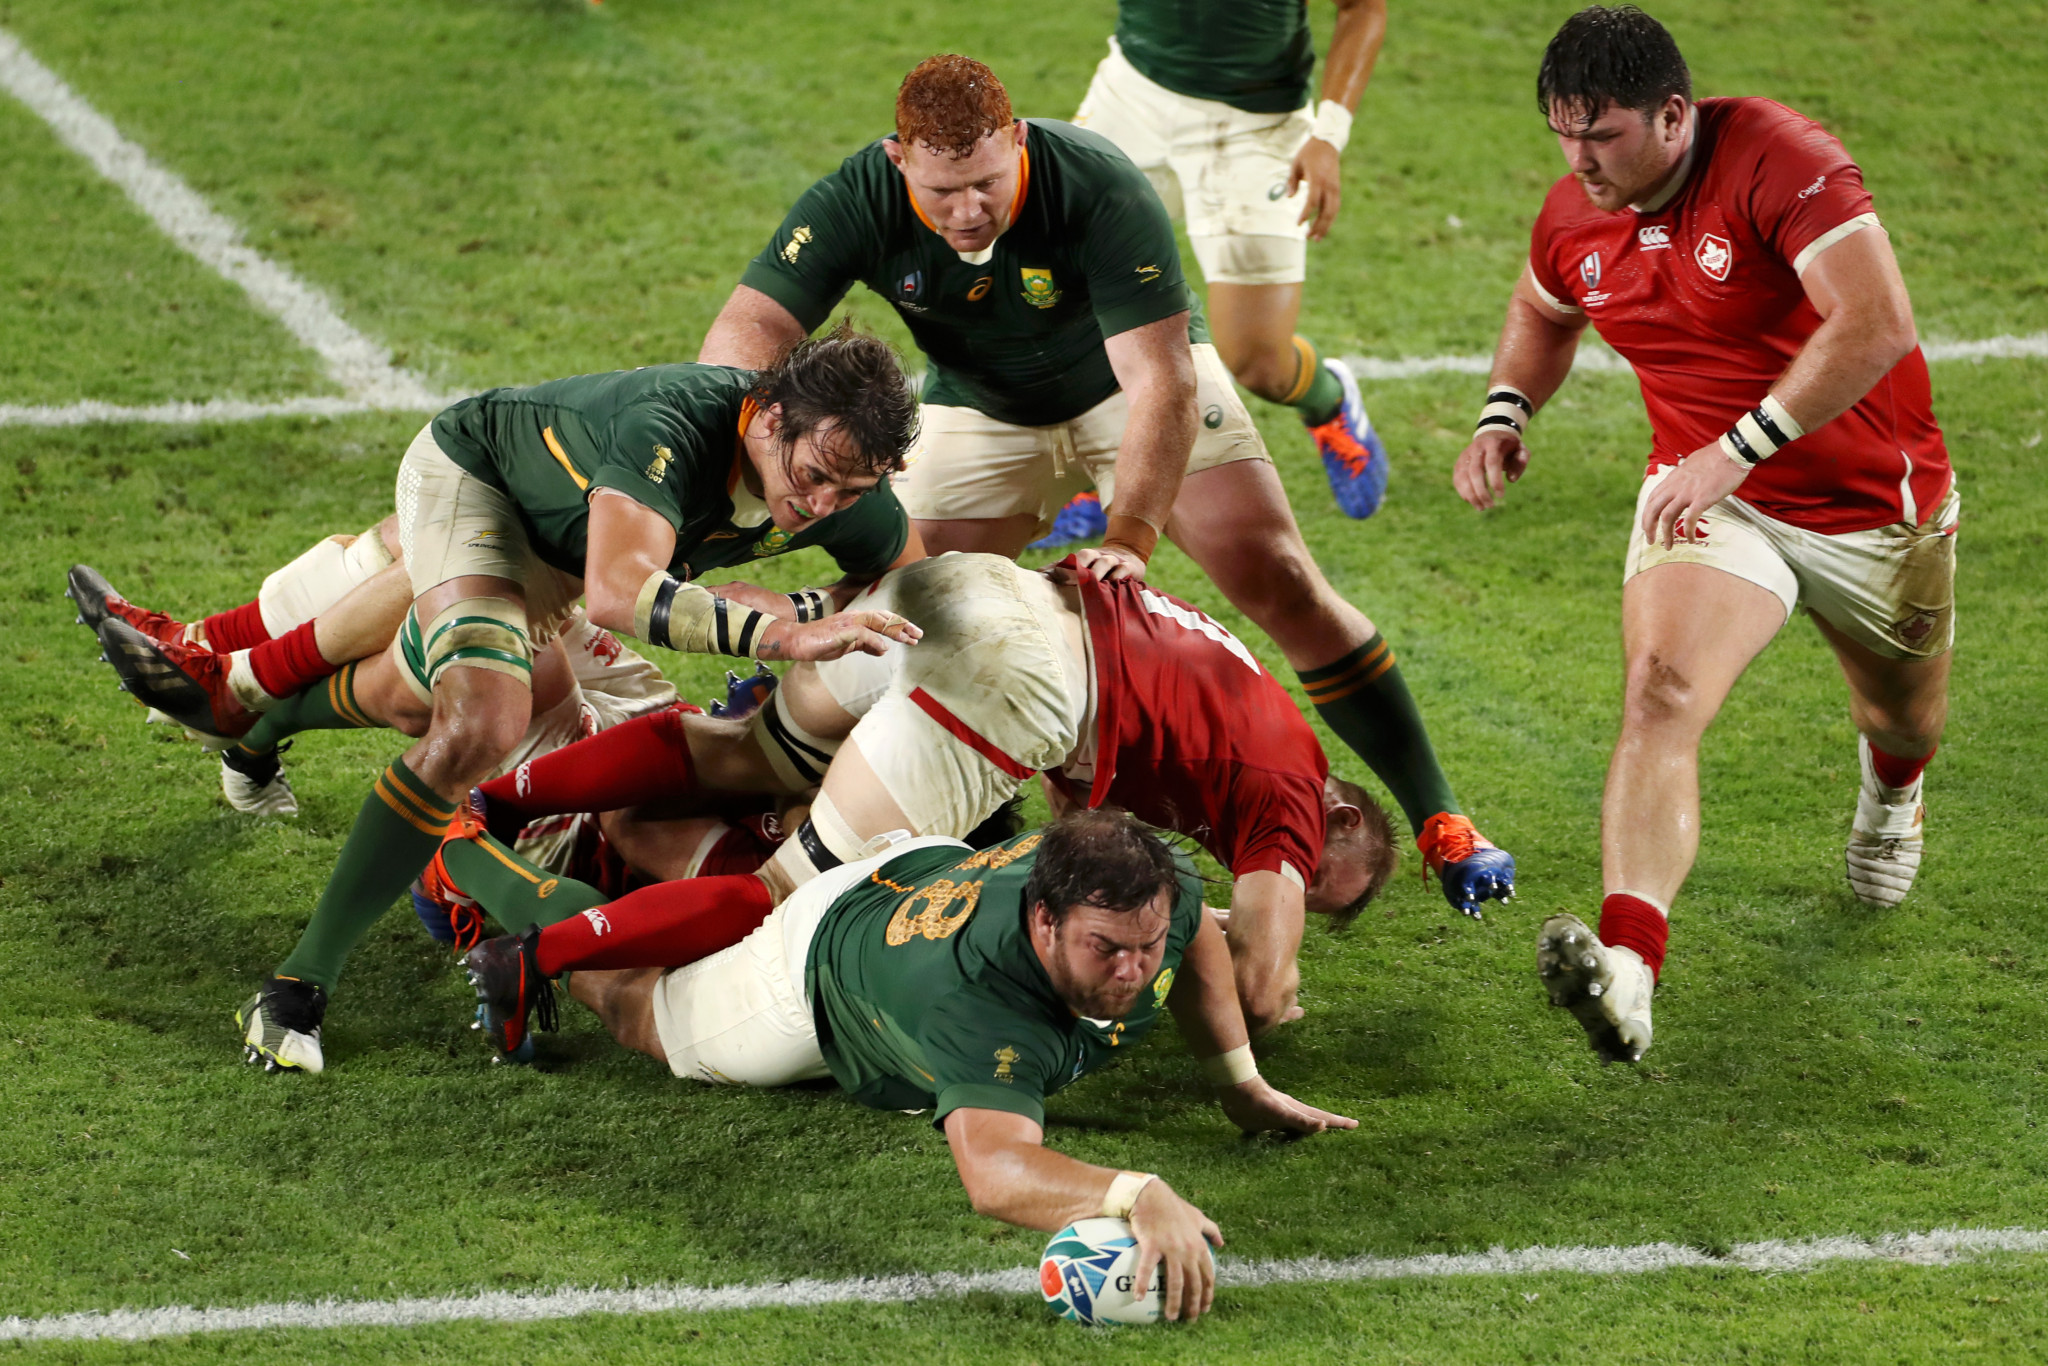 It was a try-scoring rout for South Africa against Canada ©Getty Images